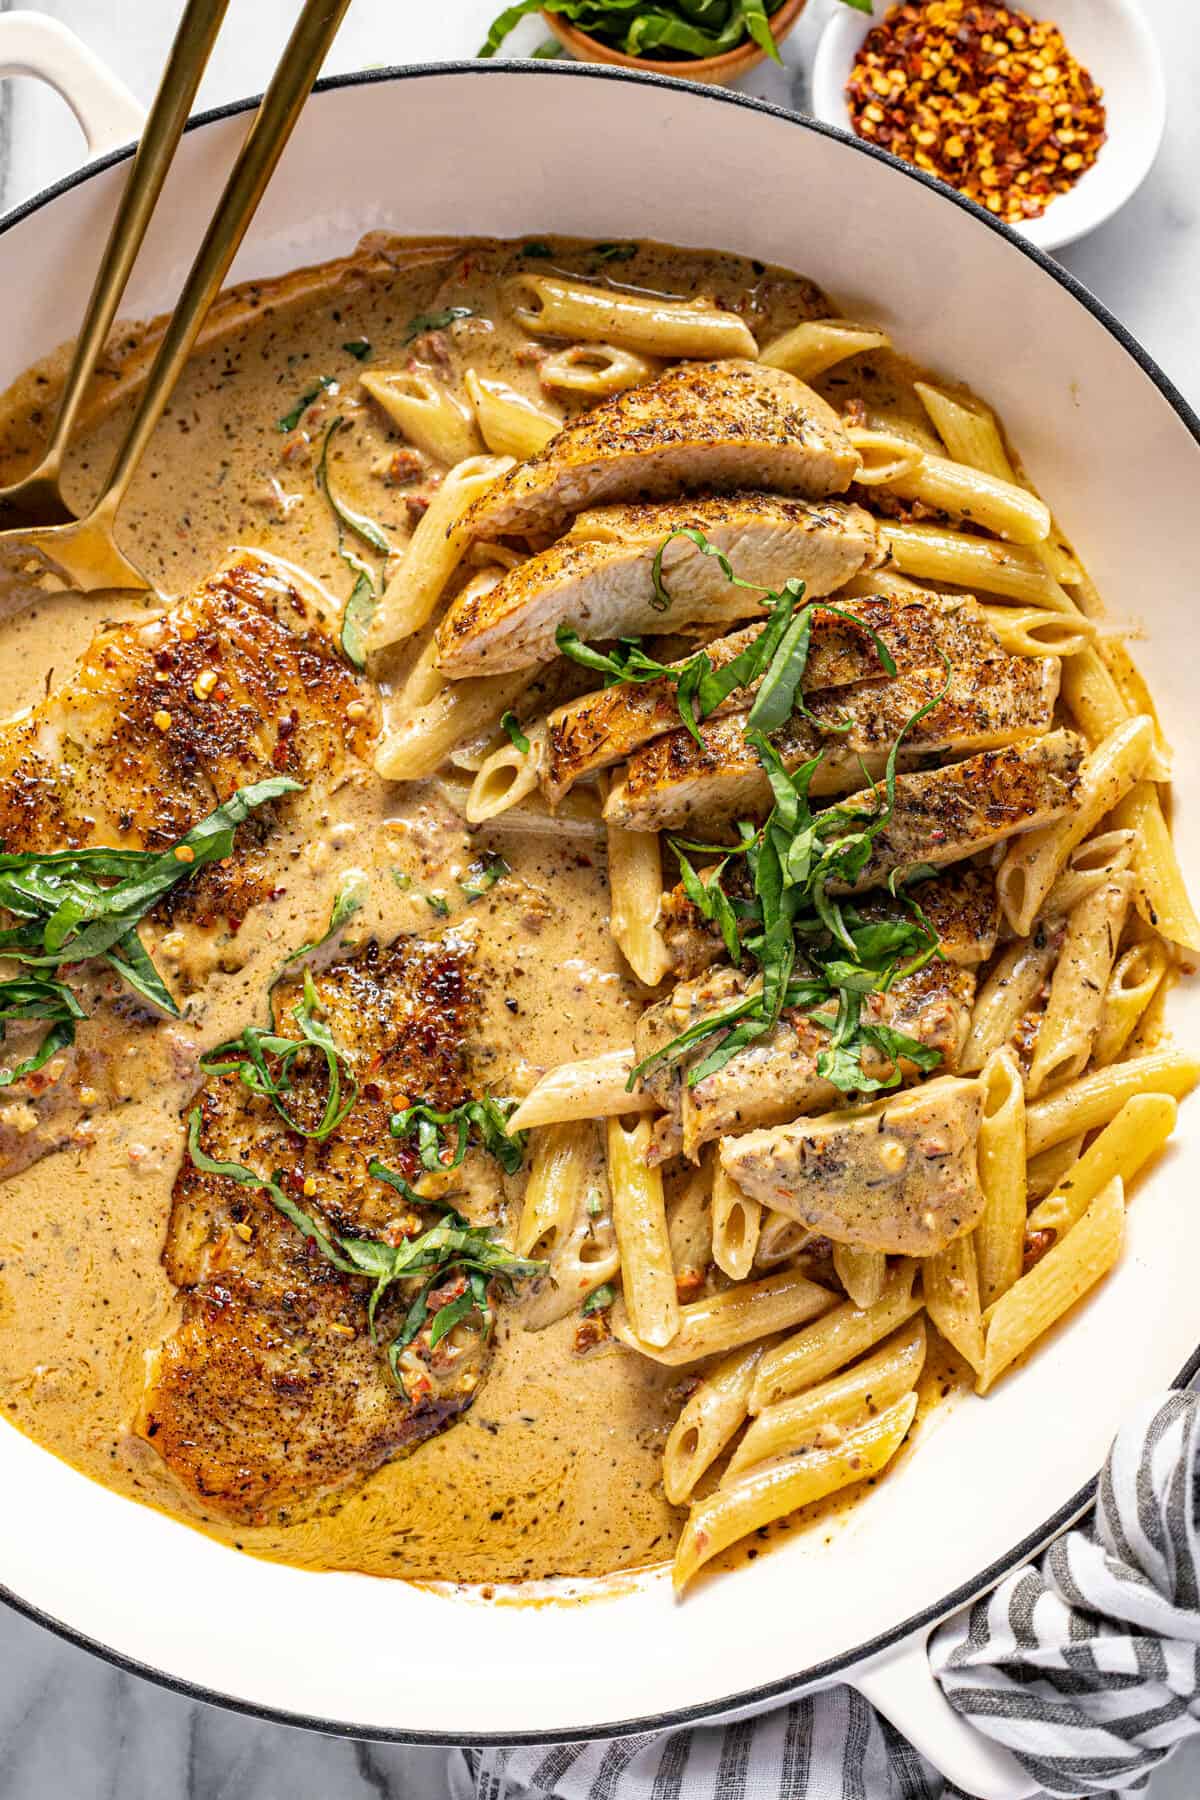 Large white pan filled with sauteed chicken, creamy garlic sauce, and pasta.